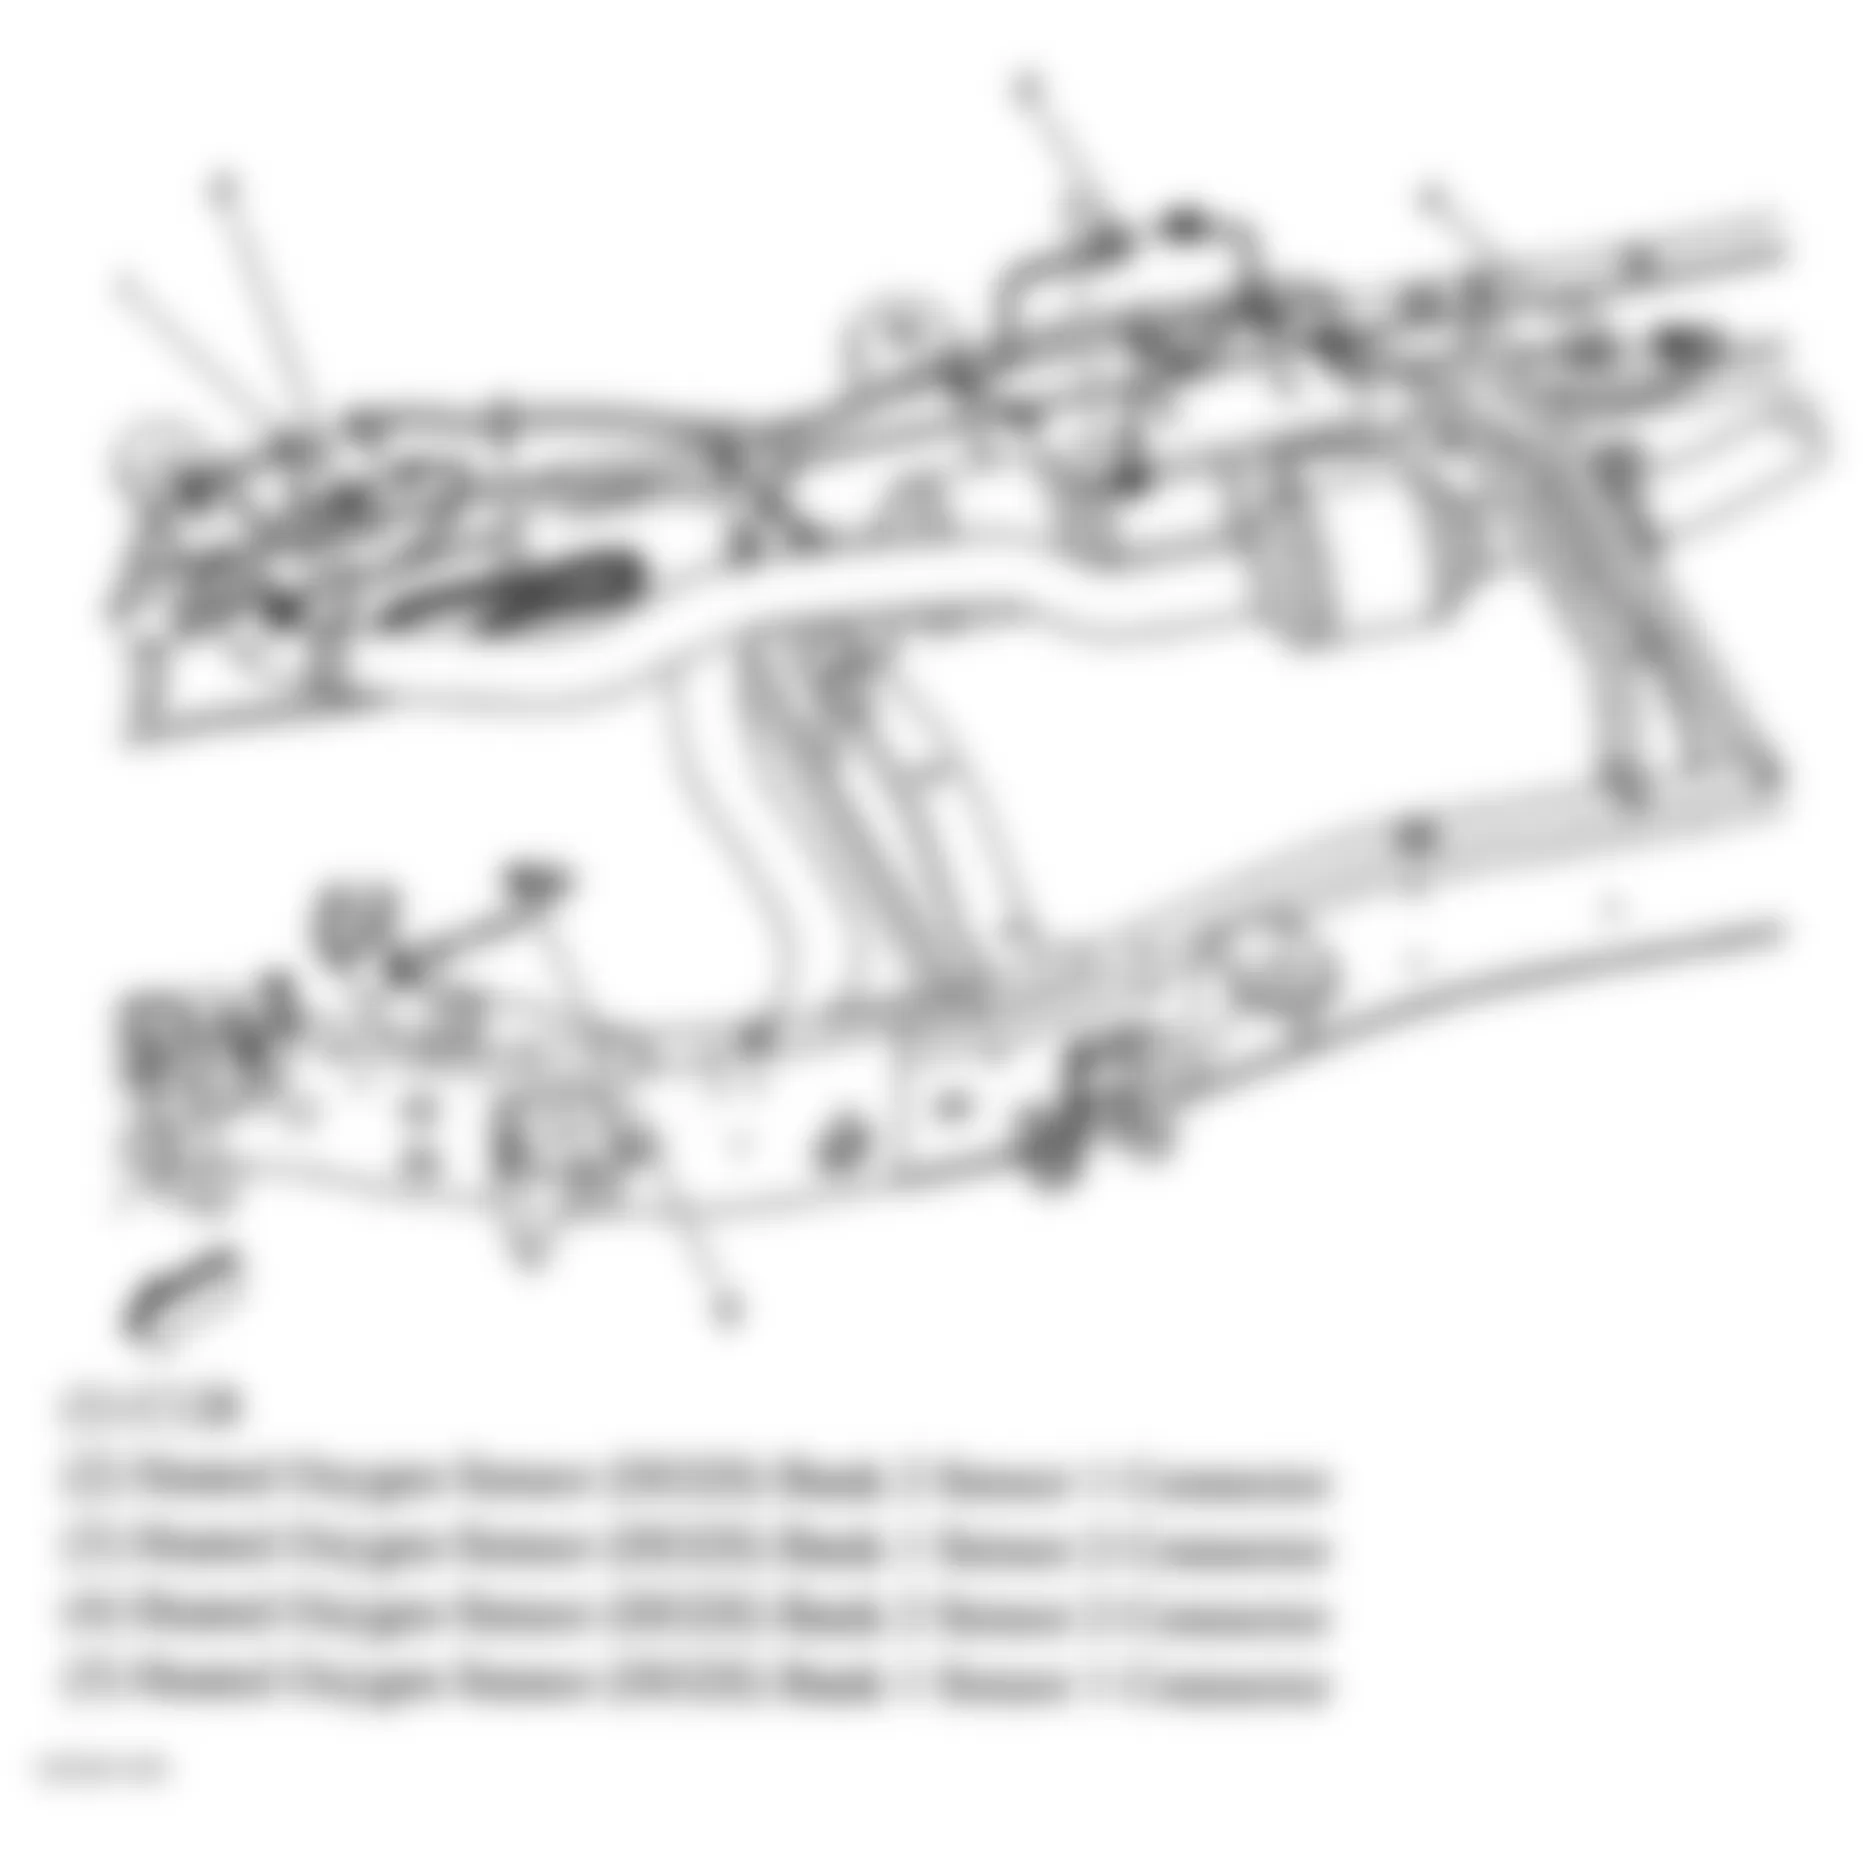 GMC Savana G3500 2007 - Component Locations -  Center Of Chassis